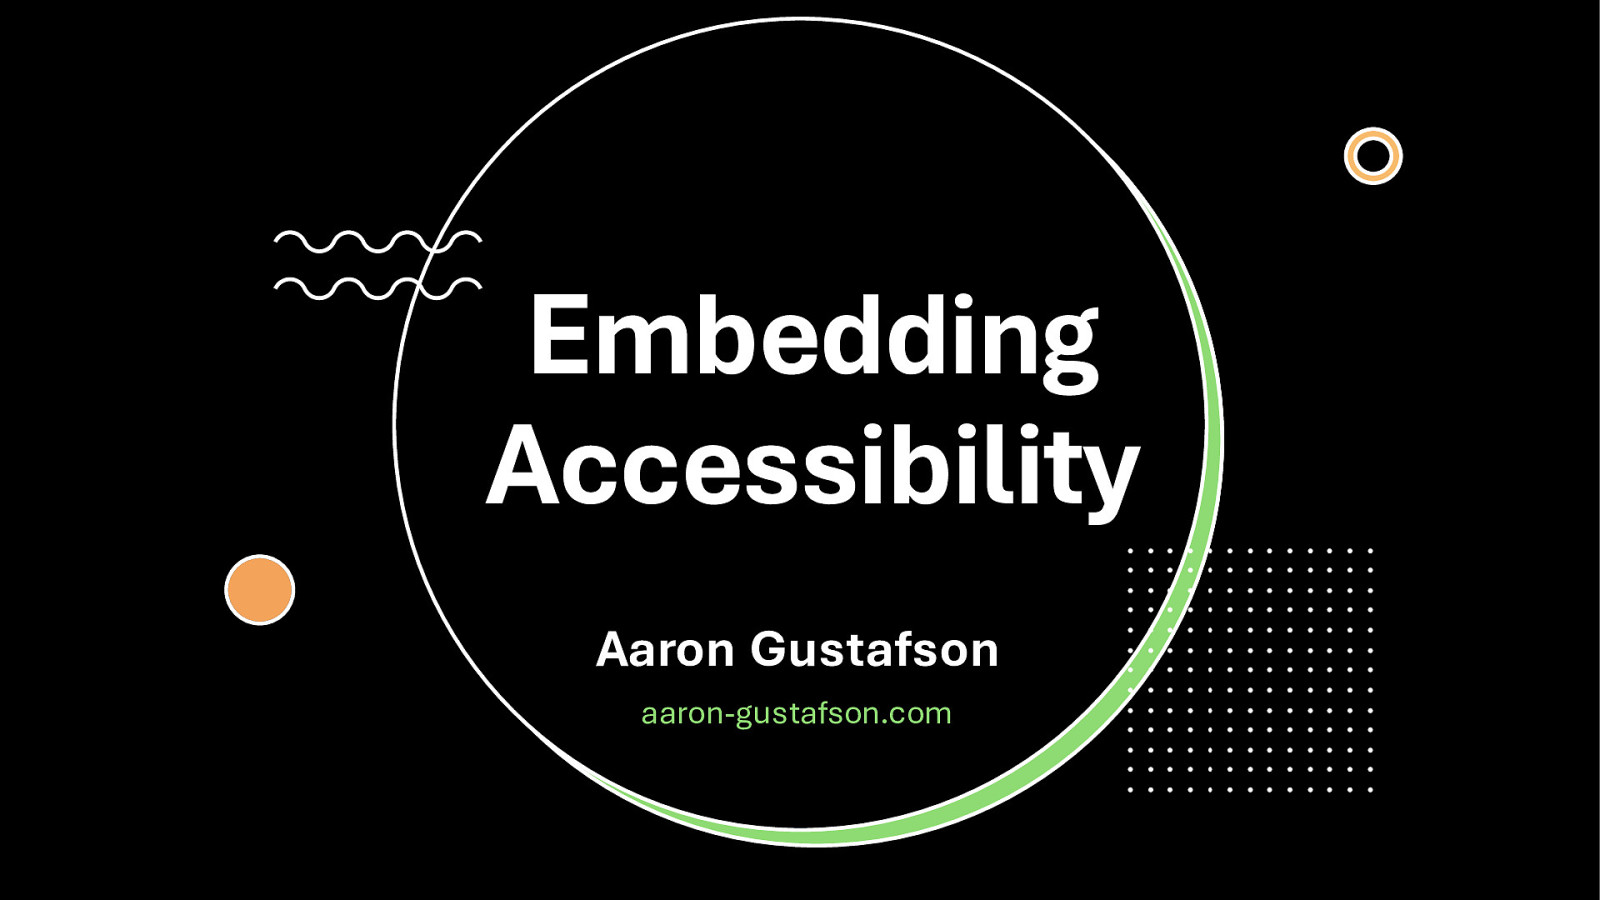 Embedding Accessibility by Aaron Gustafson